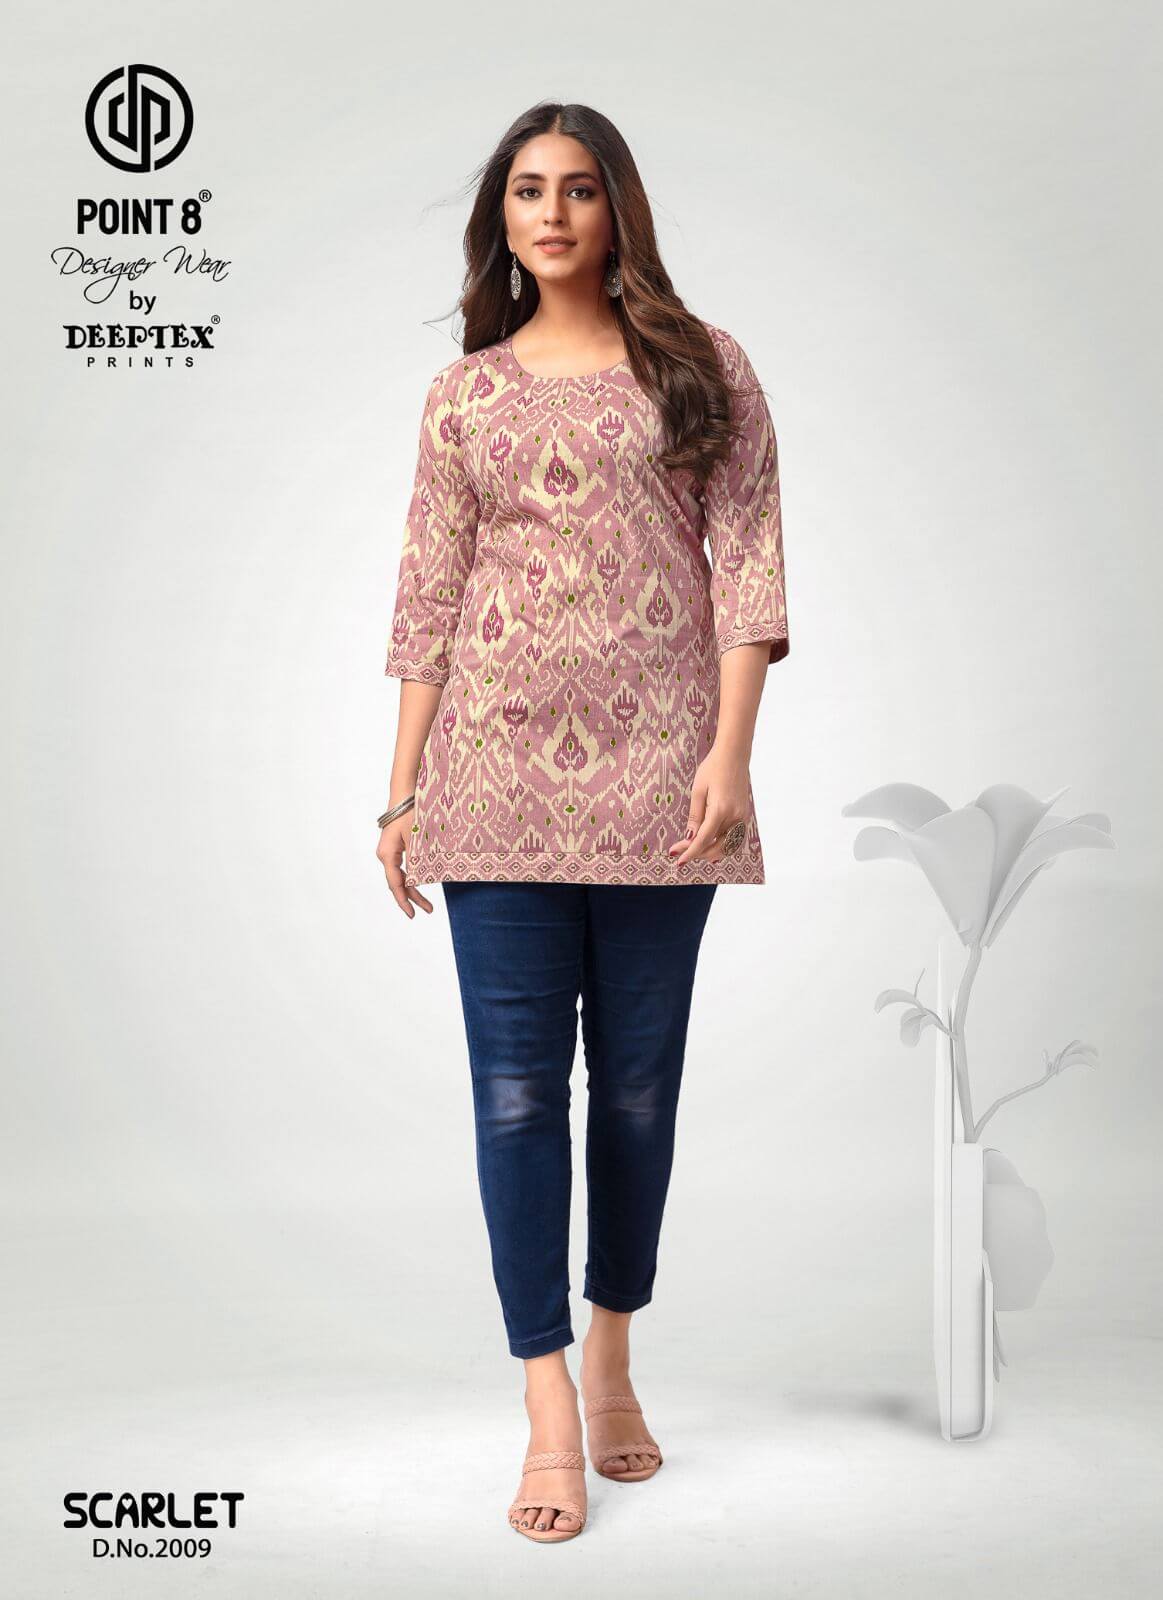 Deeptex Point 8 Scarlet vol 2 Ladies Tops Catalog collection 8